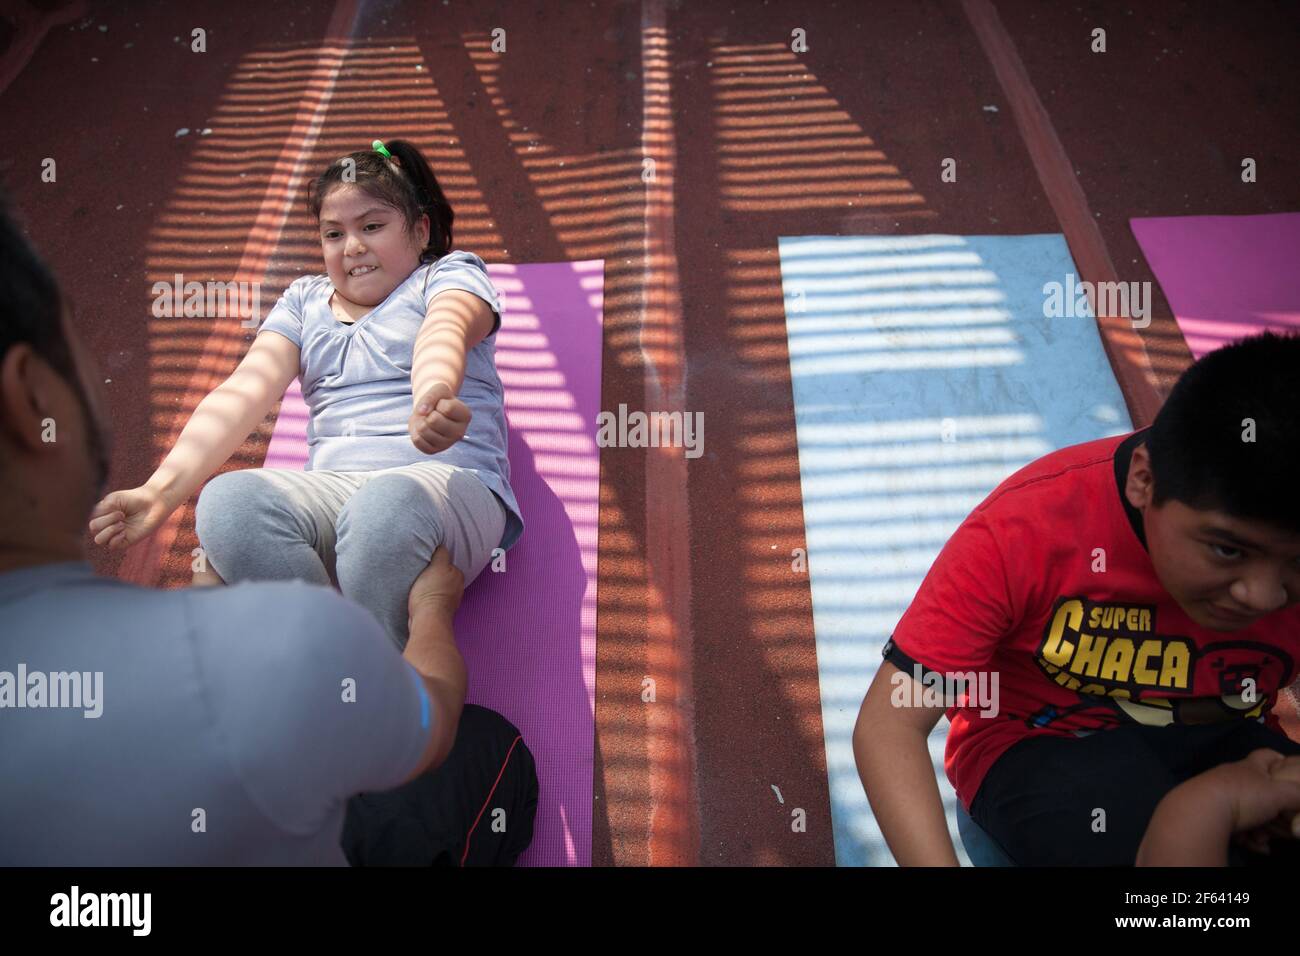 Anie Alexandra Rosas Gutierrez, a 9-year-old Mexican girl with obesity, attends a workout program to learn about how to stay healthy with the goal of losing weight and prevent morbid obesity, at the obesity clinic at the Federico Gomez Children’s Hospital in Mexico City, Mexico on June 26, 2015. Anie weighs 104 pounds and is 143 centimeters tall. Photograph by Bénédicte Desrus Stock Photo